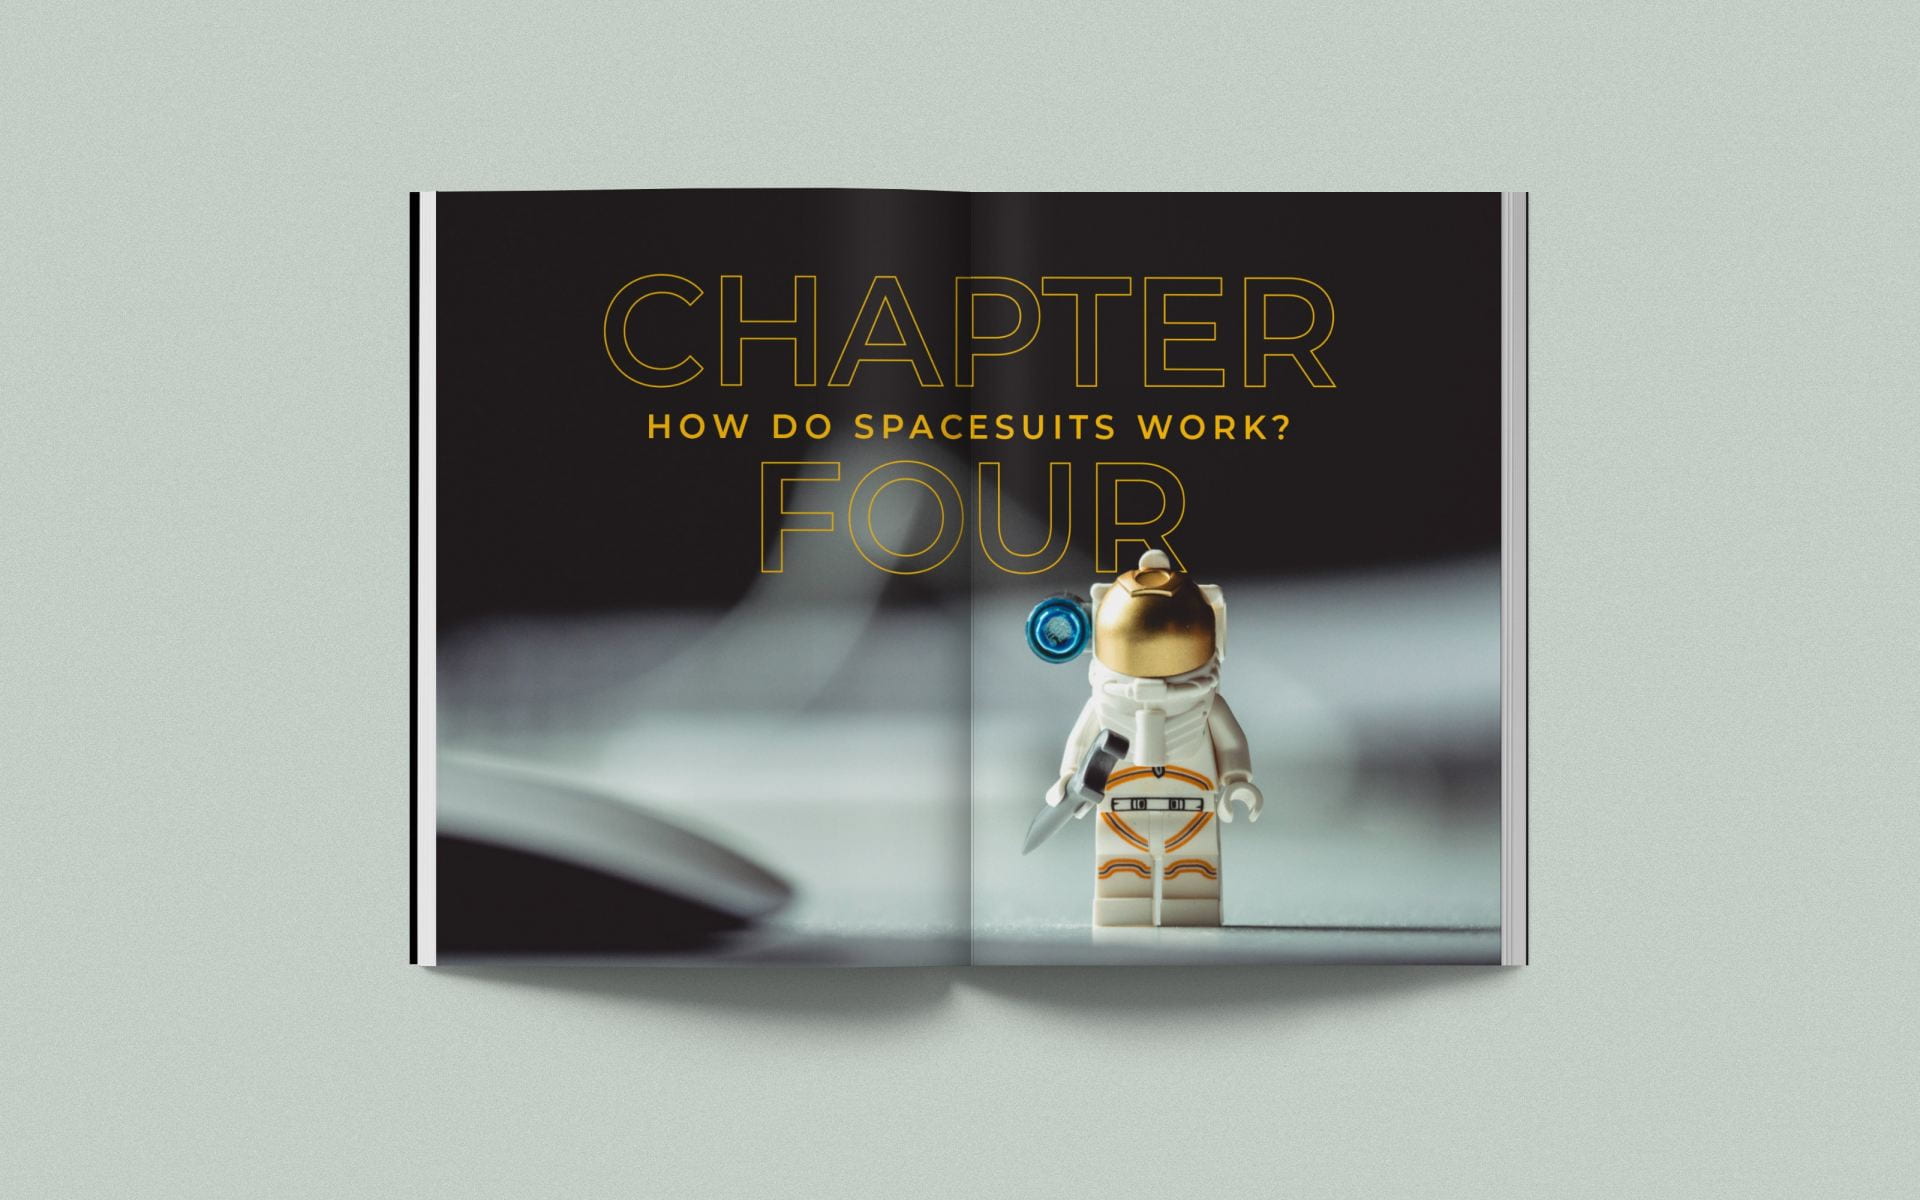 Chapter four 'How do Spacesuits work?' with a background image of an astronaut lego figure.